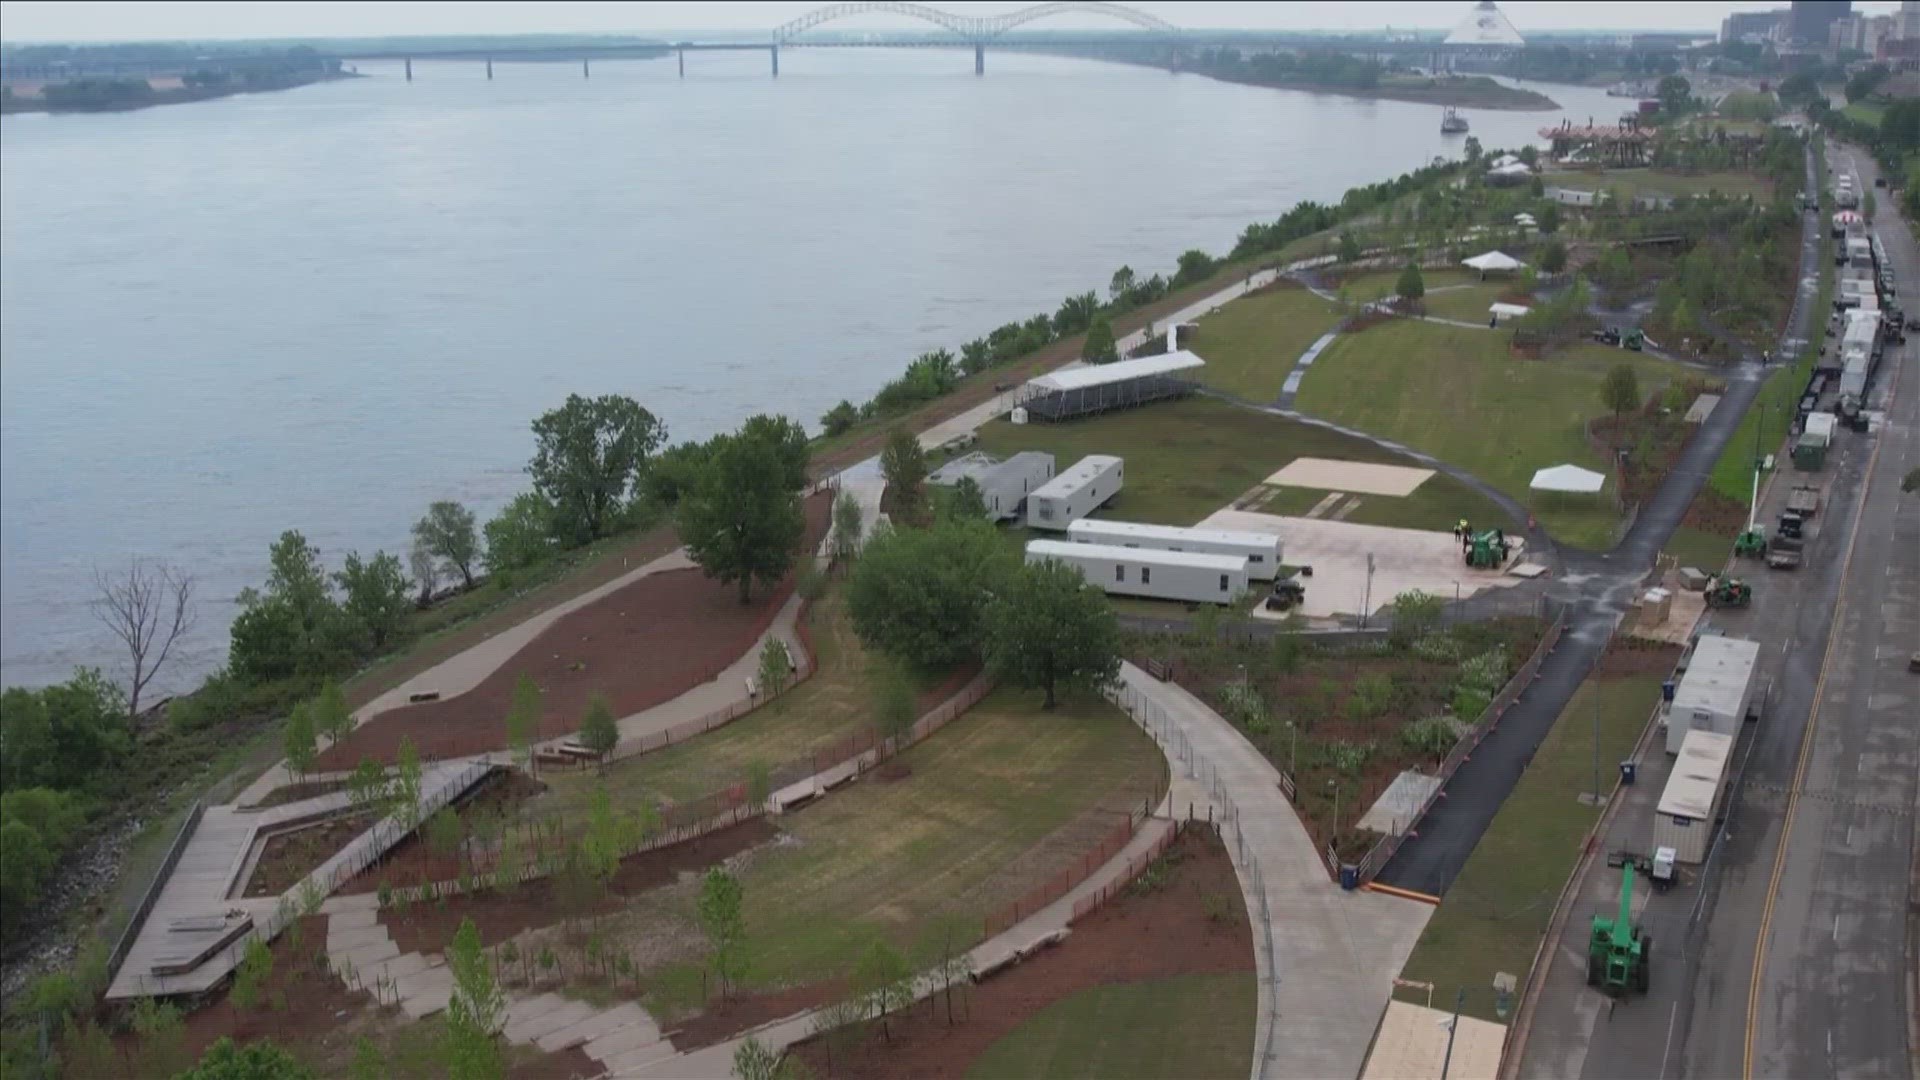 ABC24 spoke to event organizers and law enforcement about plans to keep you safe, as well as the change in layout from the recent re-do of Tom Lee Park.